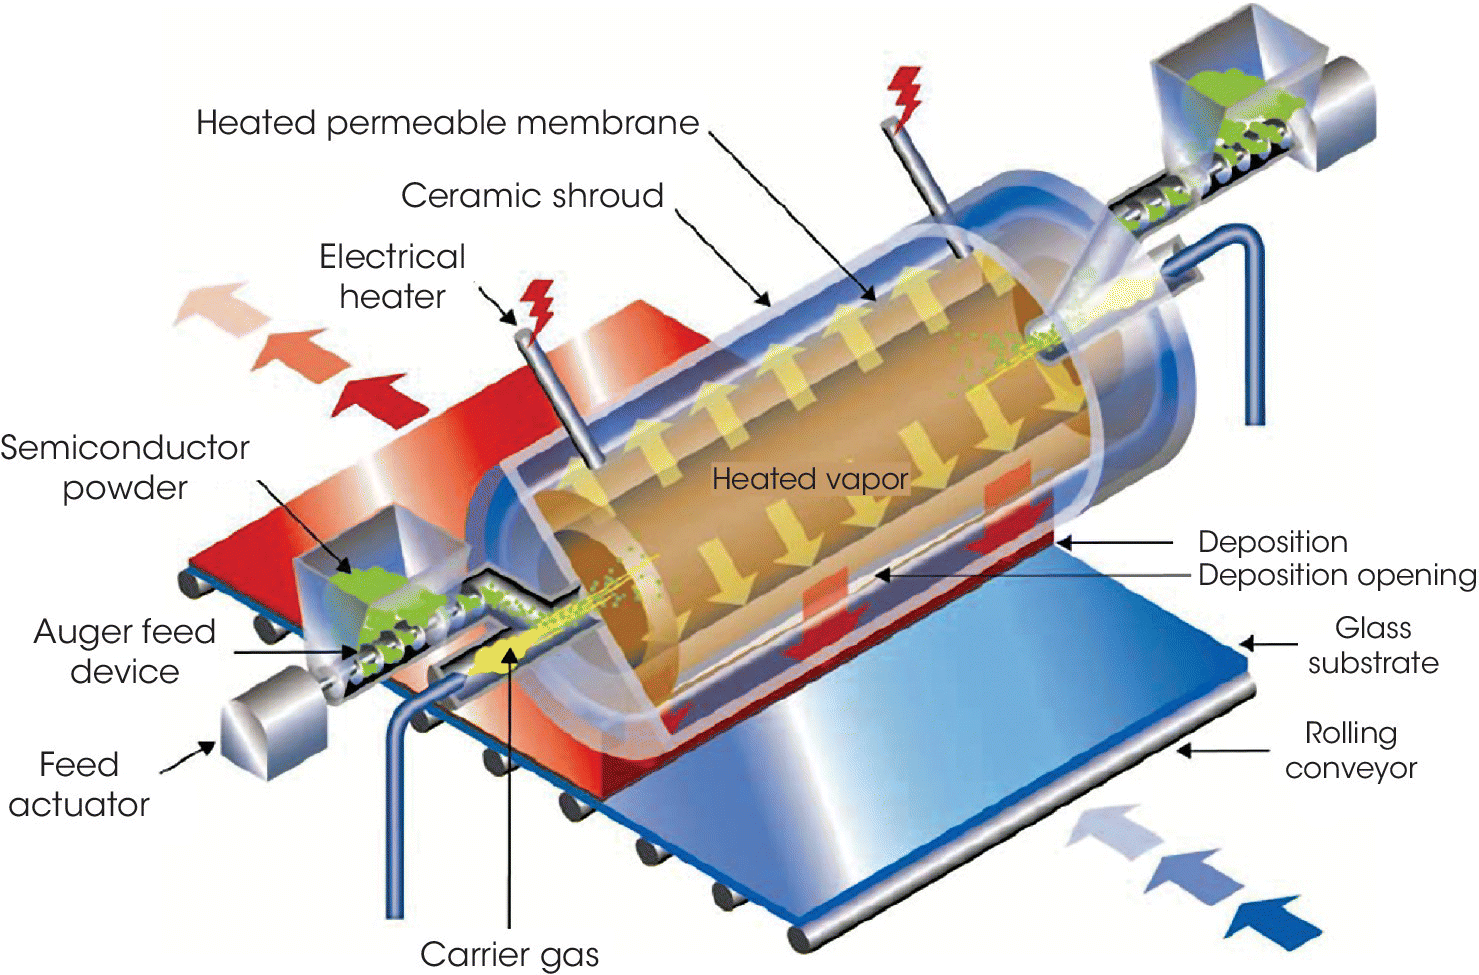 Simplified schematic of industrial vapor transport deposition in CdTe PV manufacturing (First Solar) with parts labeled rolling conveyor, glass substrate, deposition, deposition opening, feed actuator, etc.